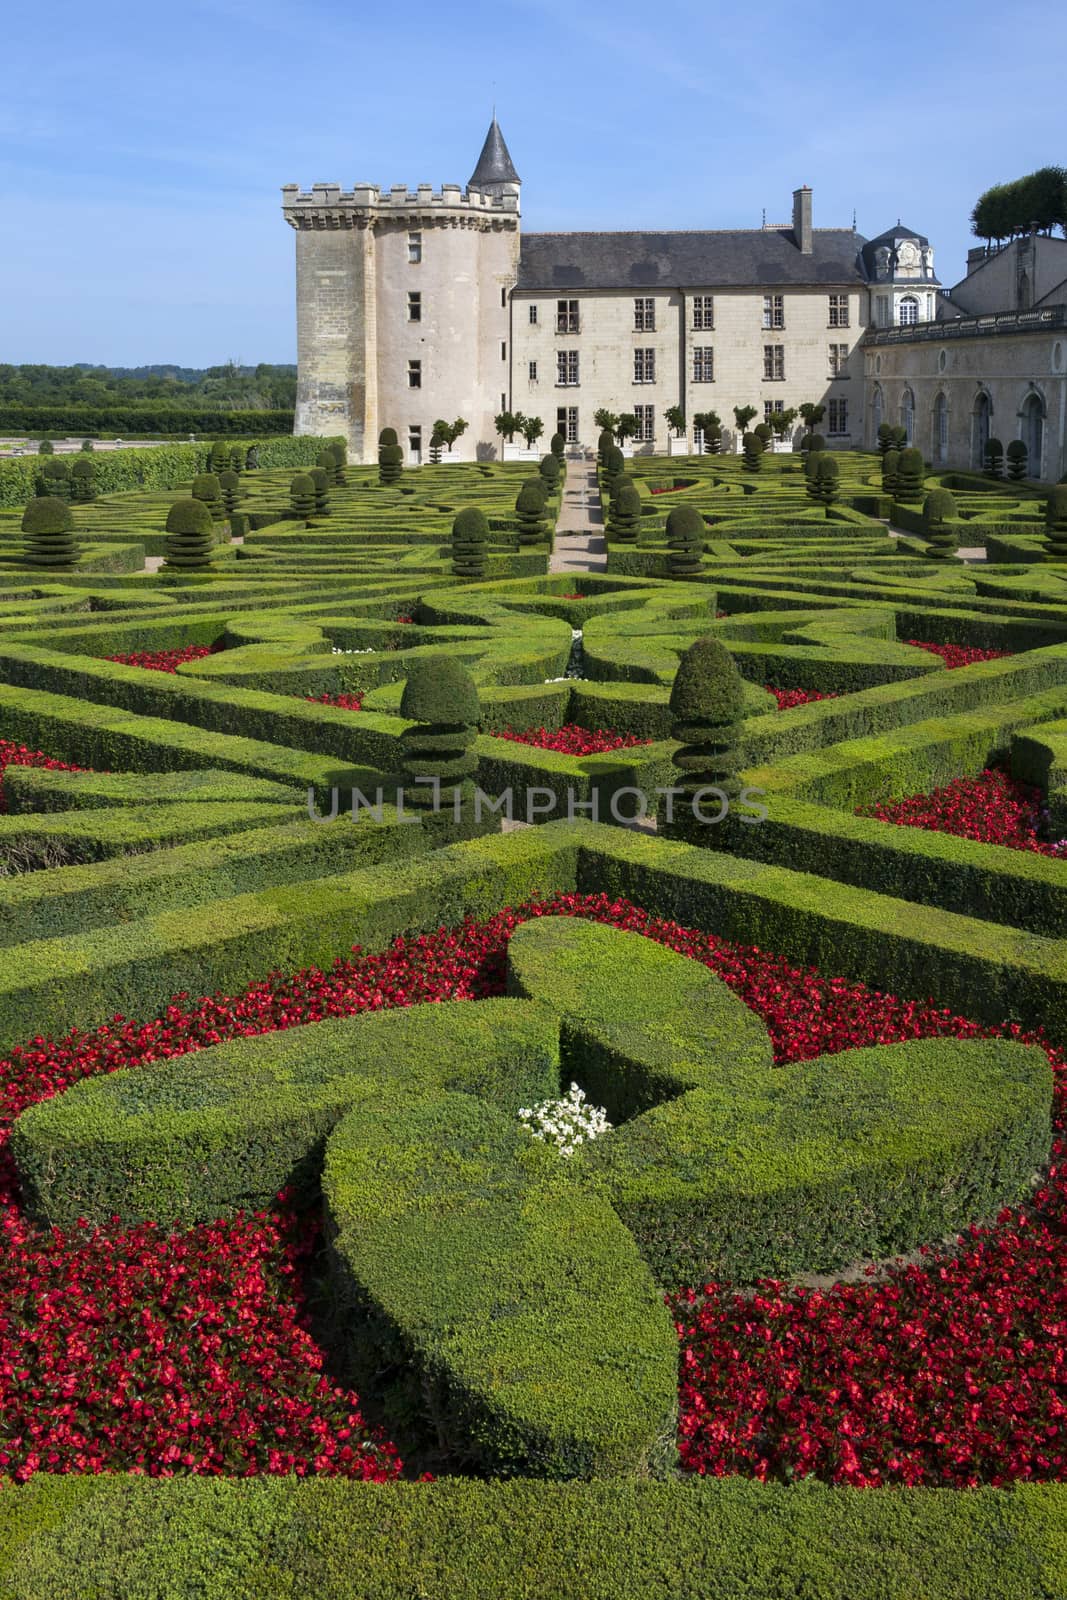 The 16th century chateau and gardens of Villandry in the Loire Valley in France.